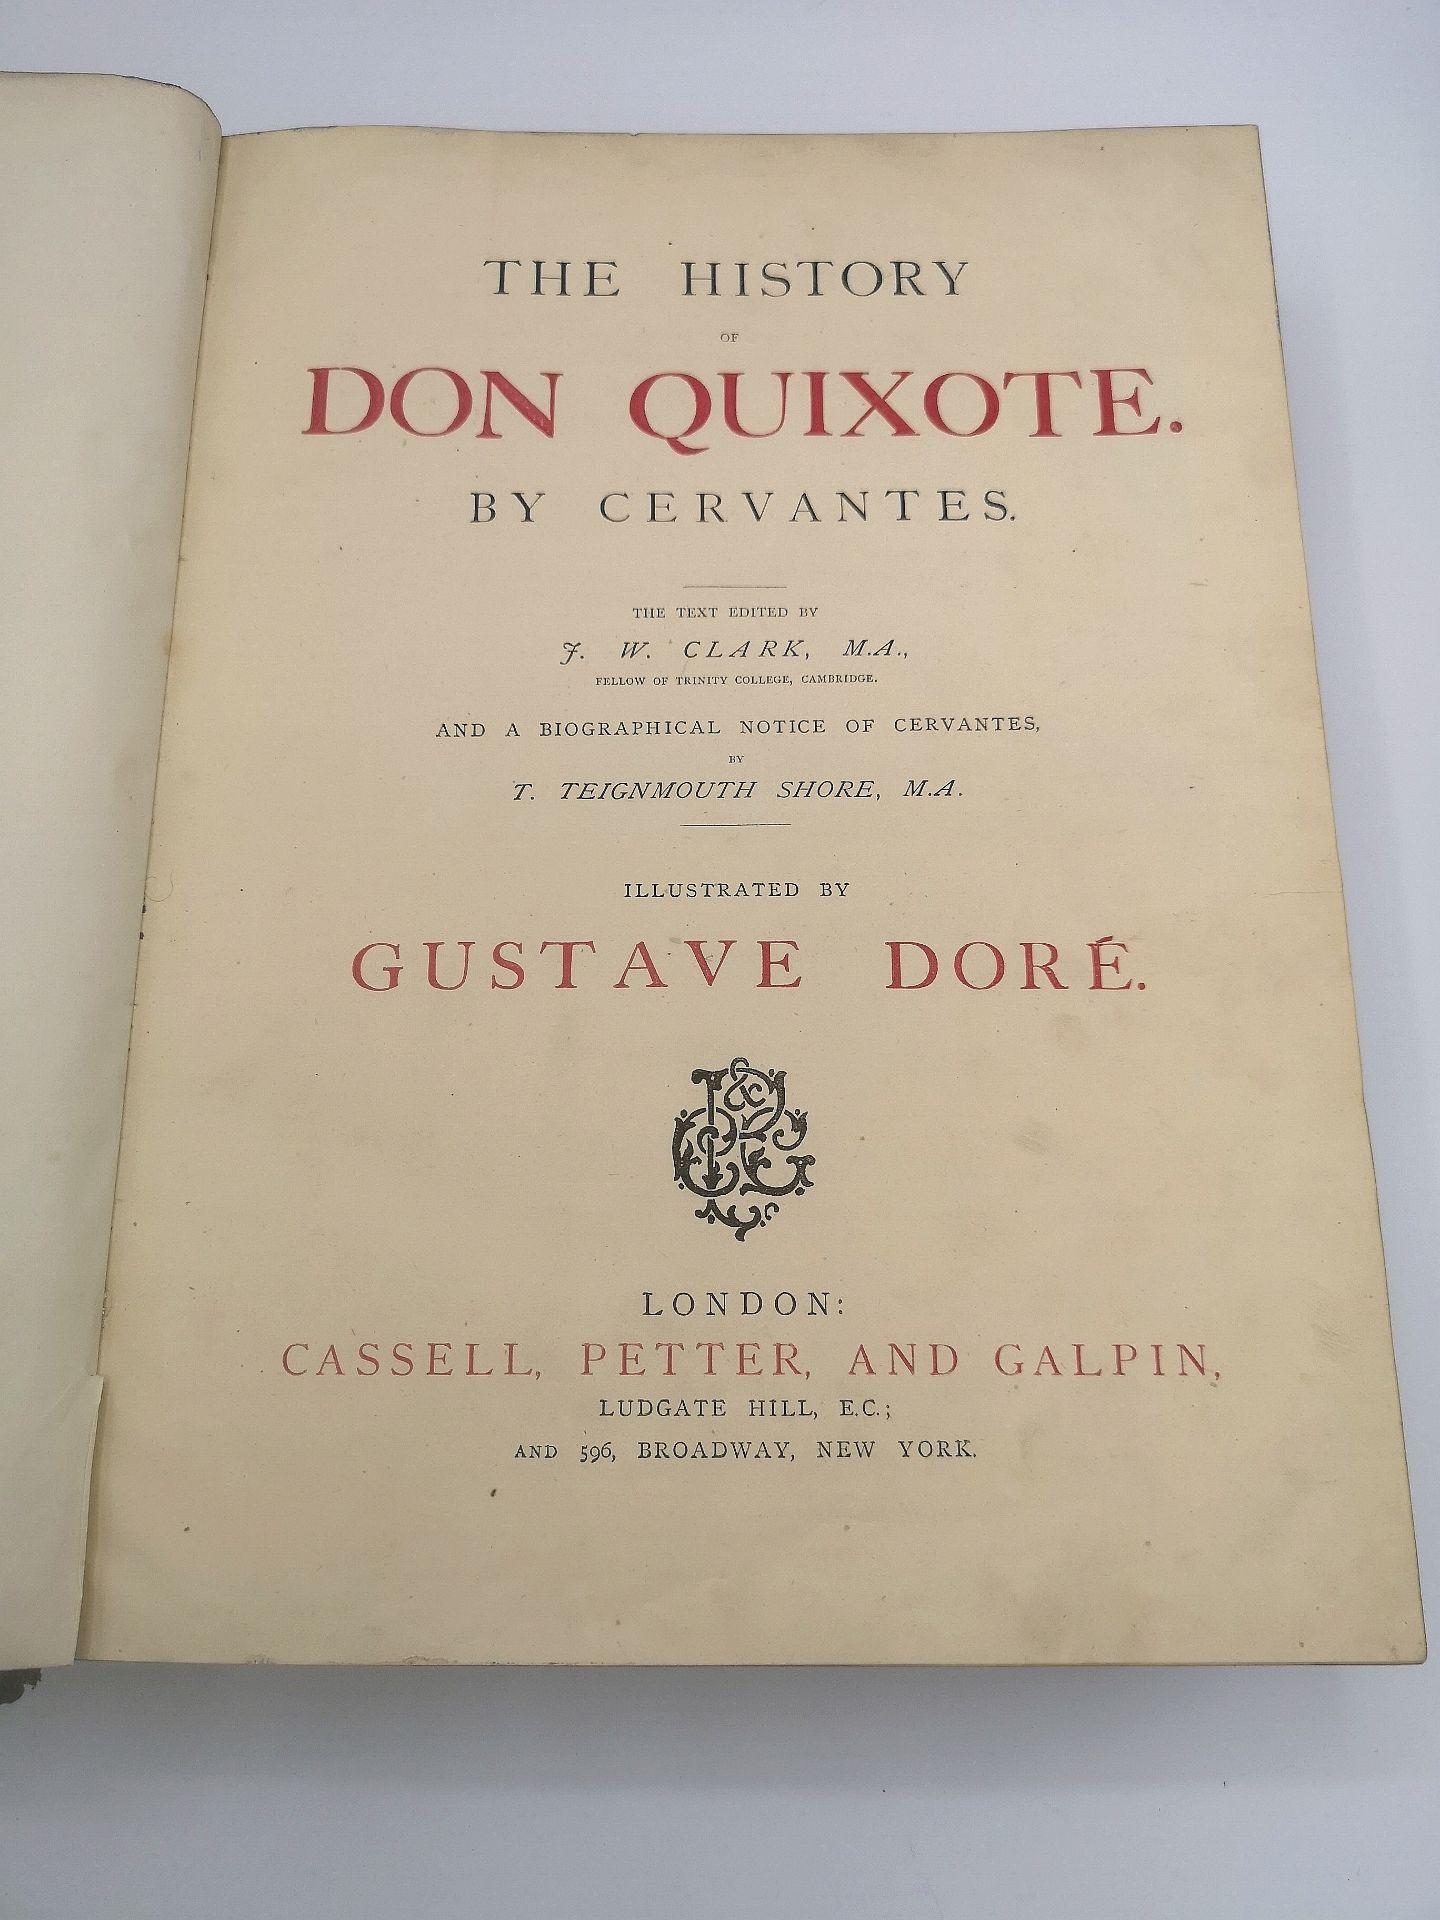 The History of Don Quixote by Cervantes, illustrated by Gustave Dore - Image 2 of 3